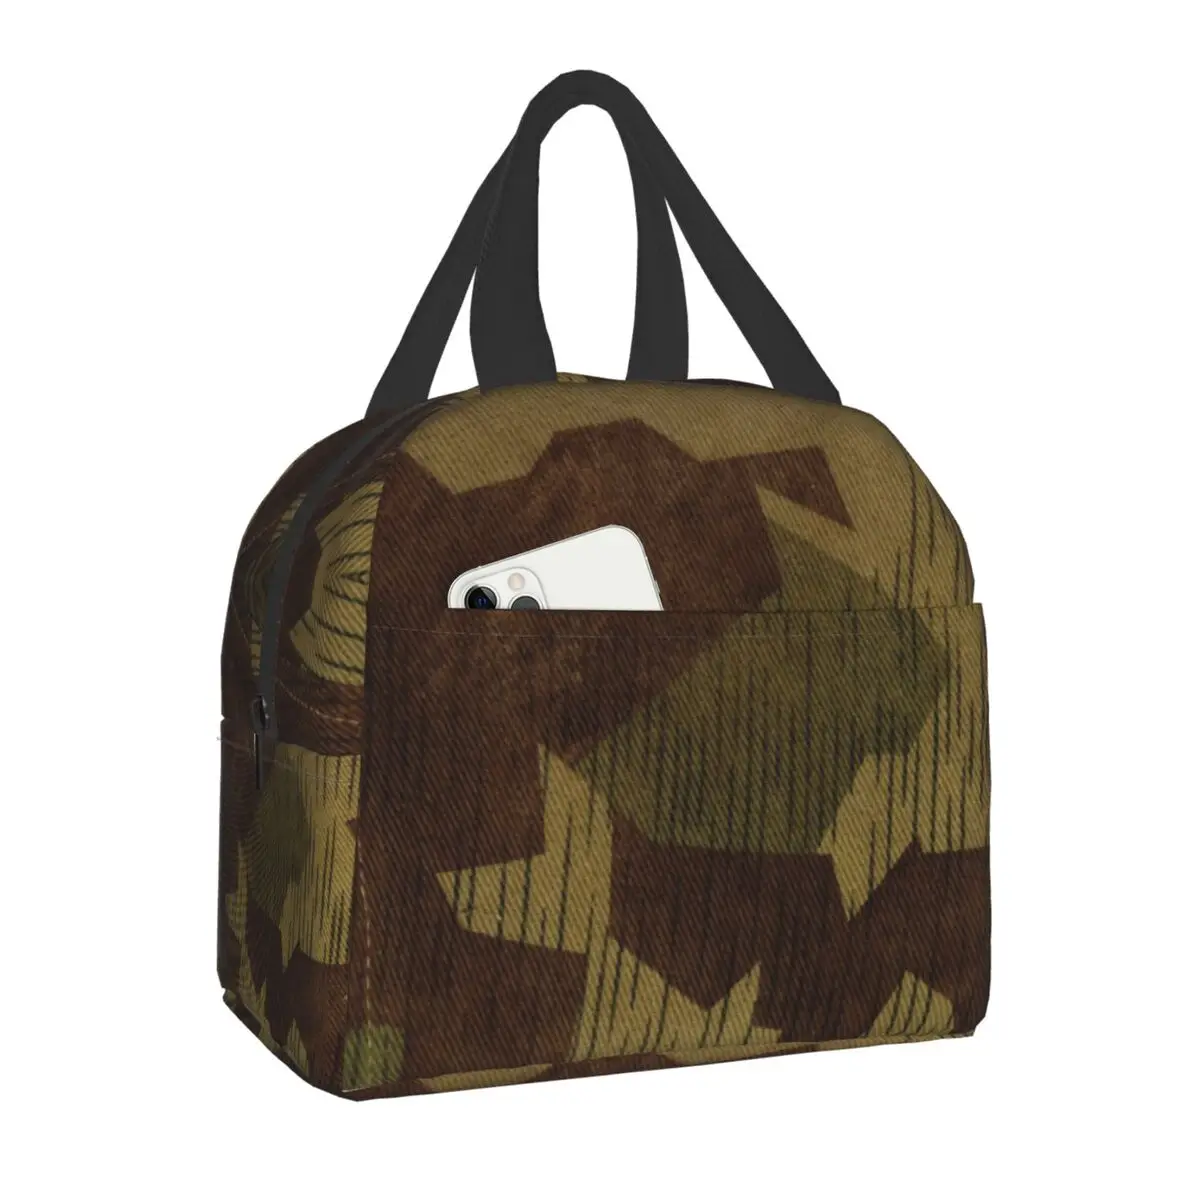 WW2 Splittertarn Camo Lunch Boxes for Women Waterproof Military Camouflage Thermal Cooler Food Insulated Lunch Bag Kids School